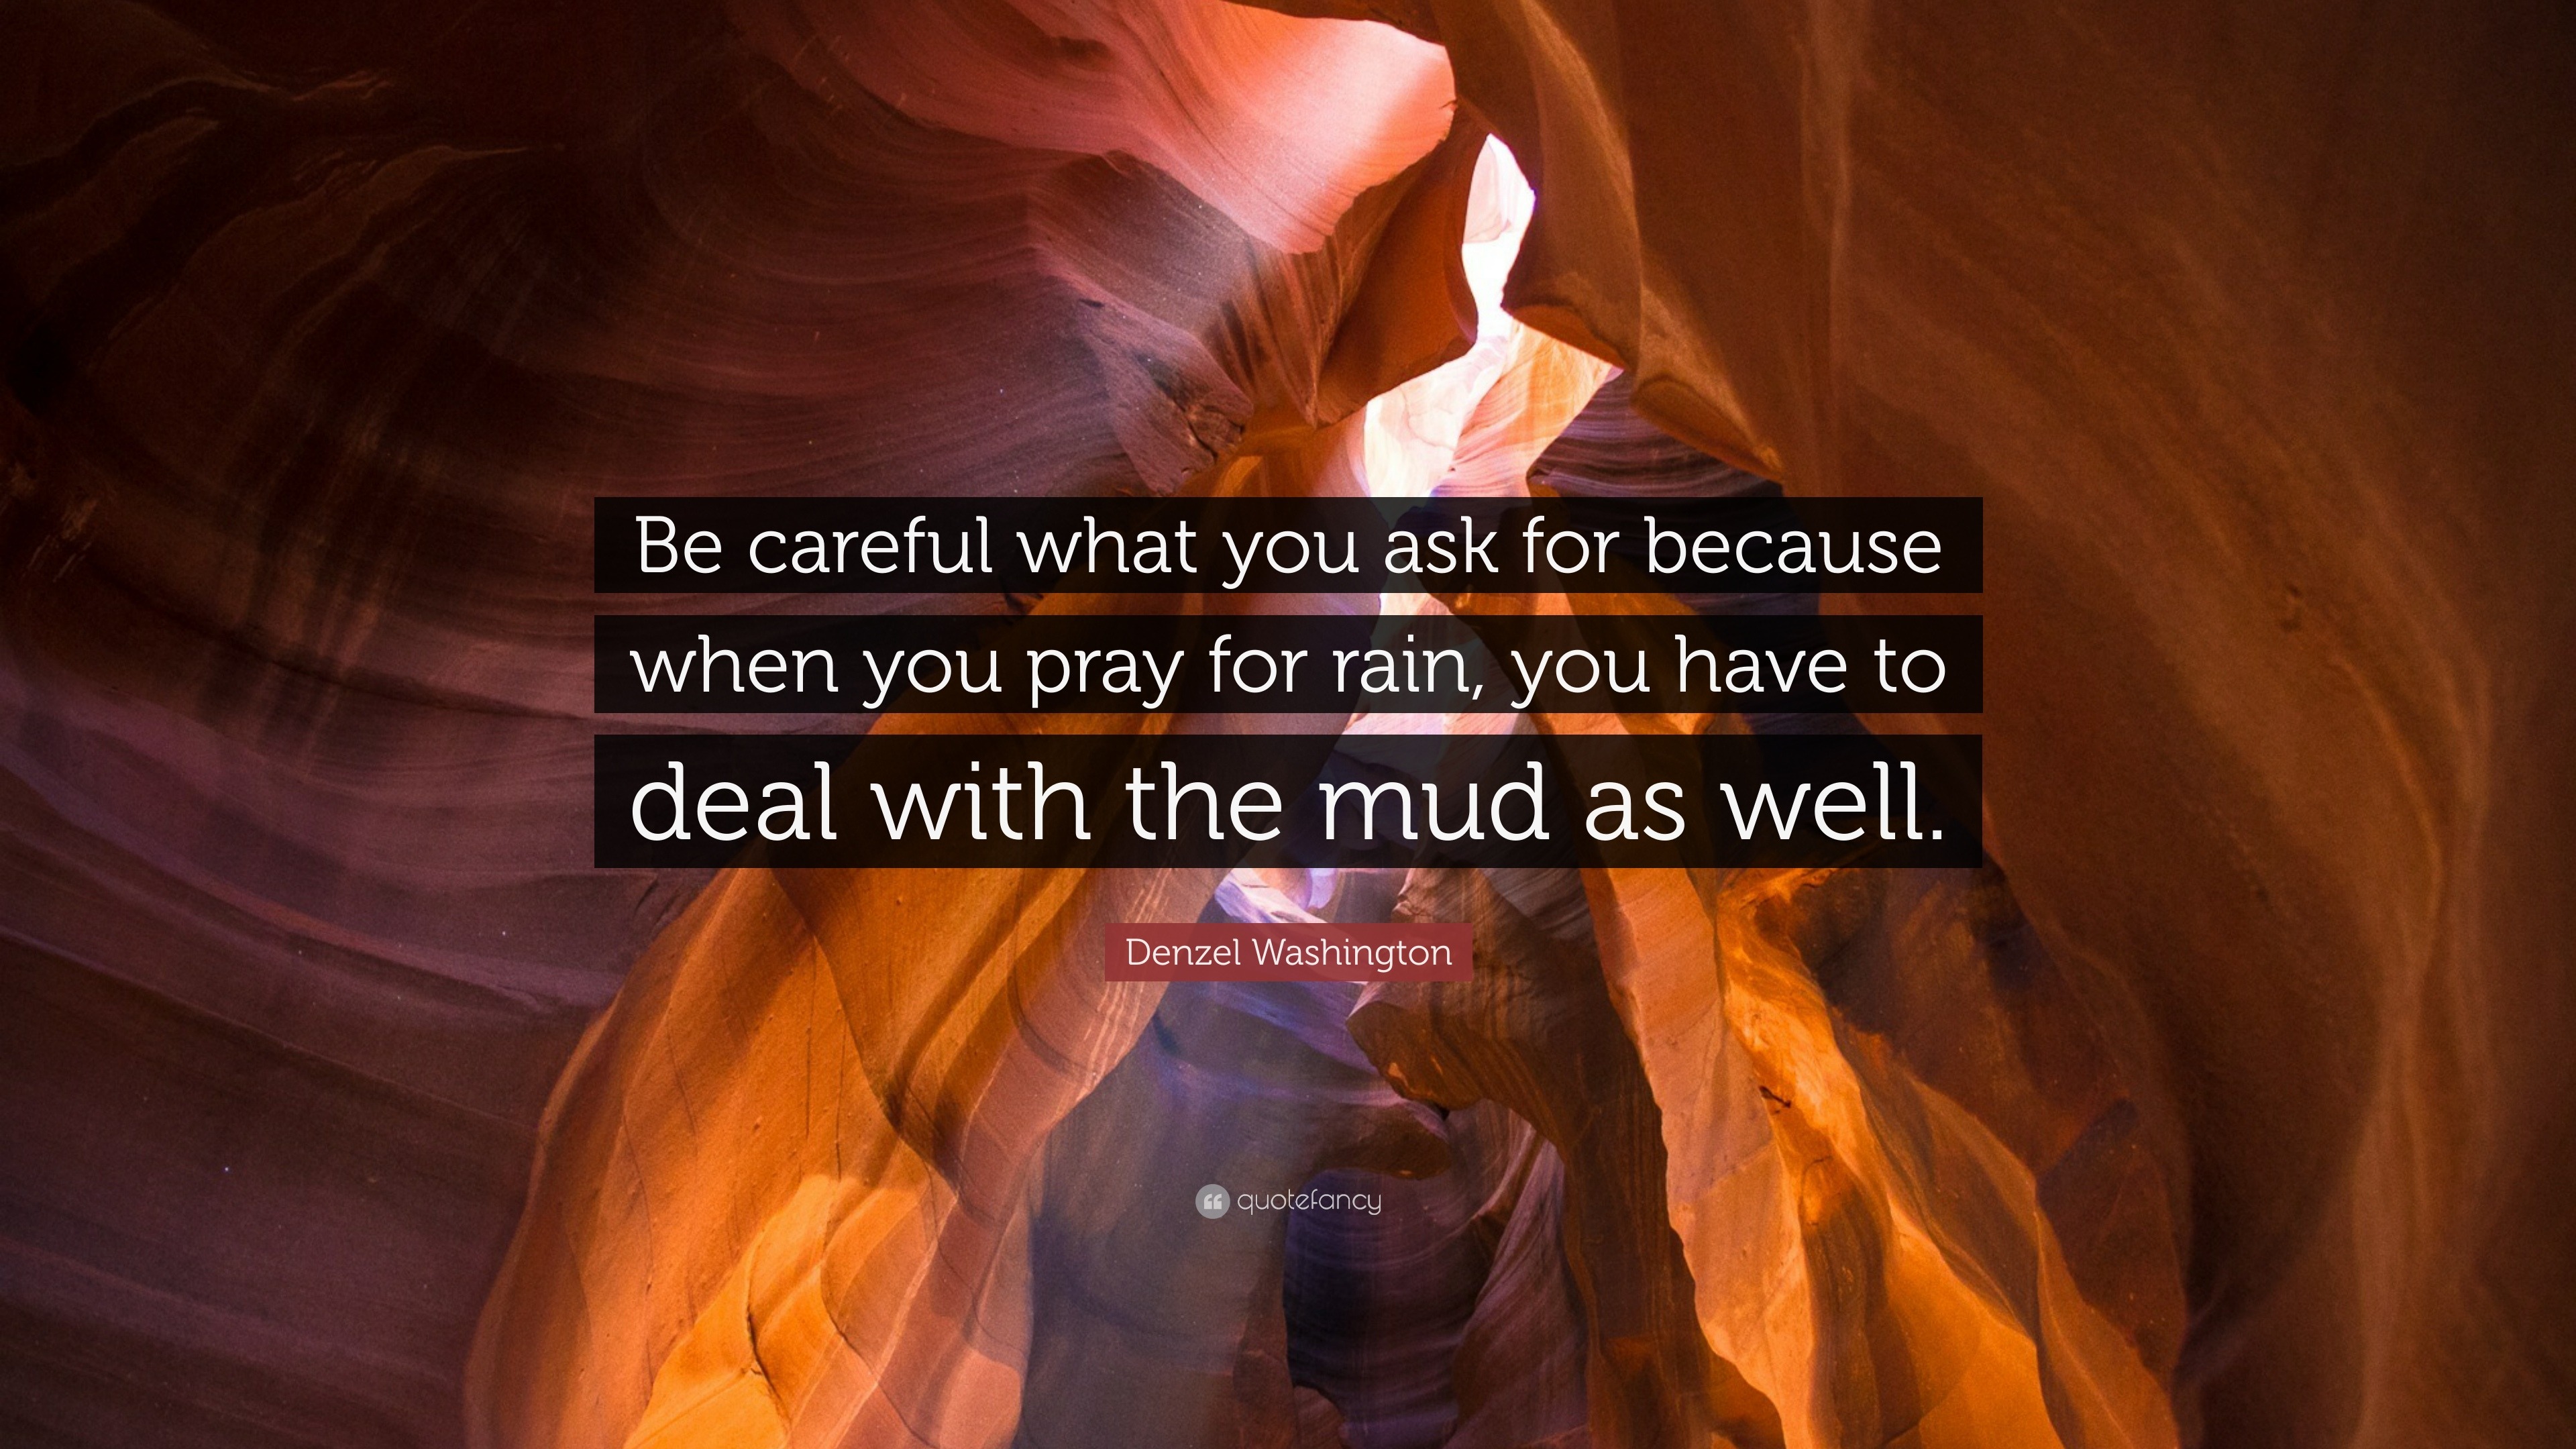 Denzel Washington Quote “be Careful What You Ask For Because When You Pray For Rain You Have